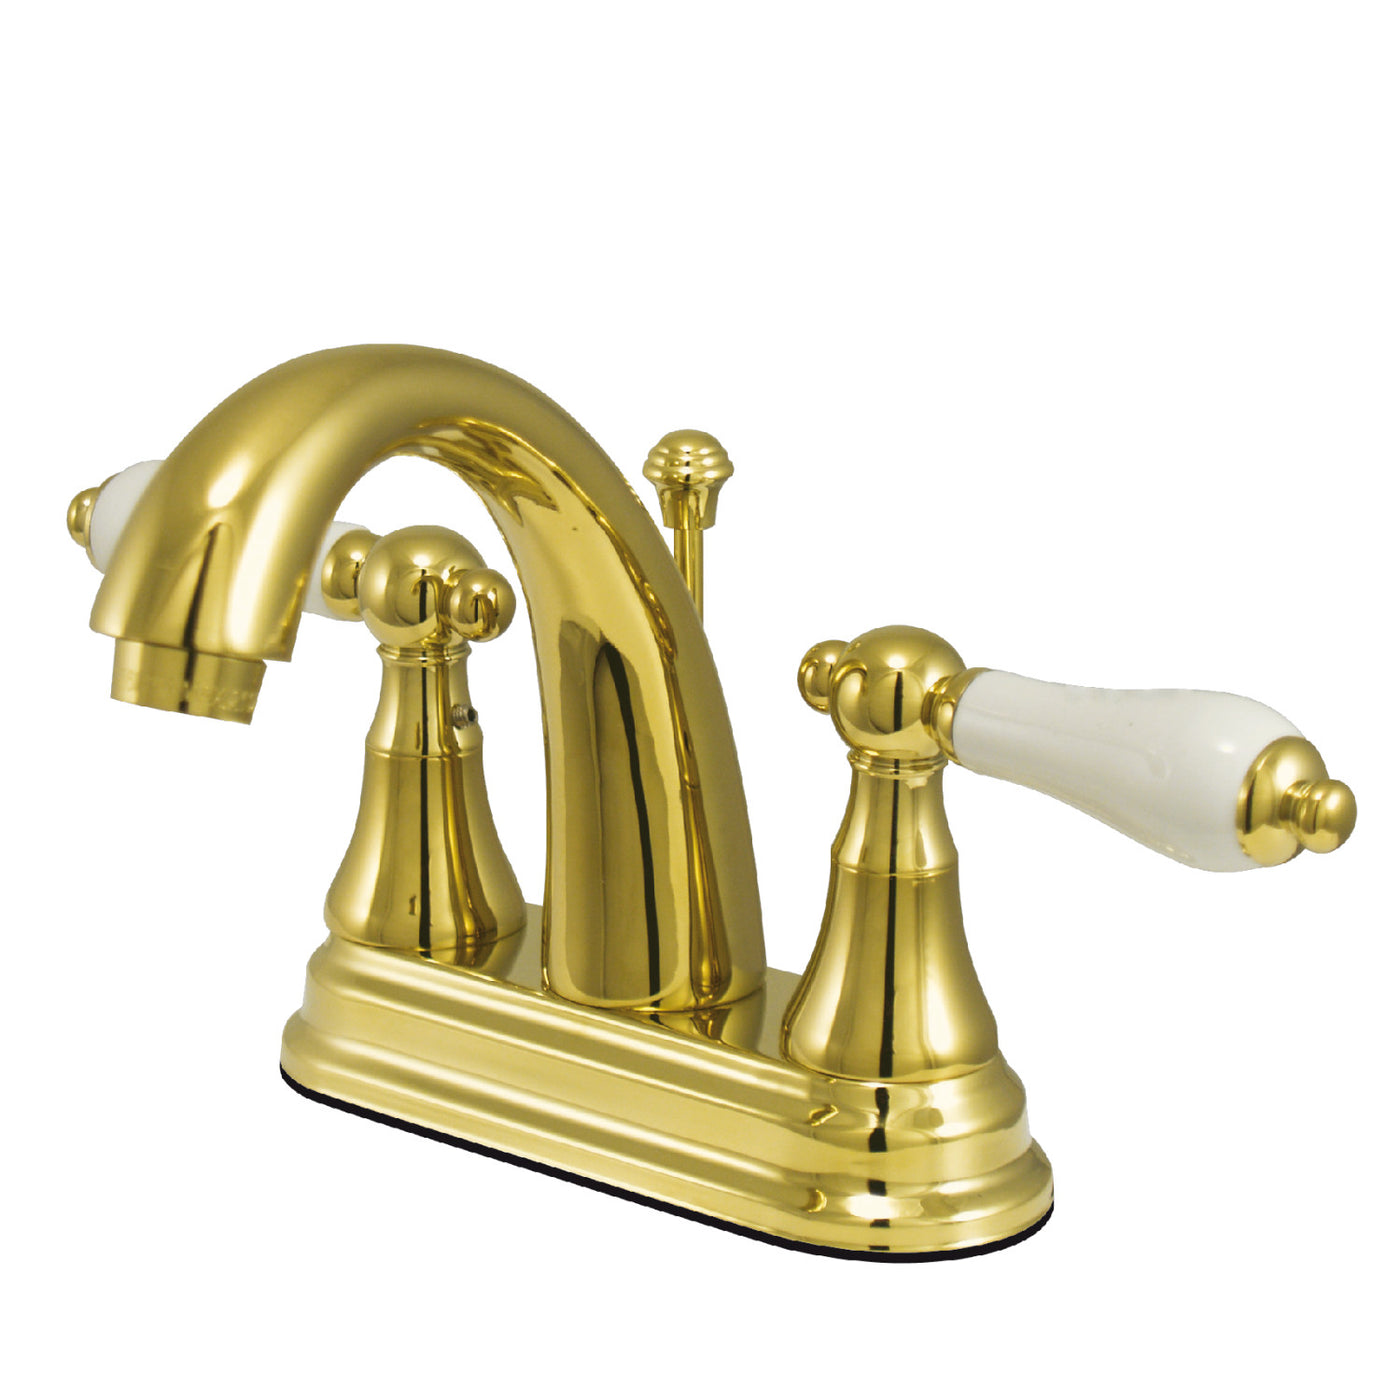 Elements of Design ES7612PL 4-Inch Centerset Bathroom Faucet with Brass Pop-Up, Polished Brass